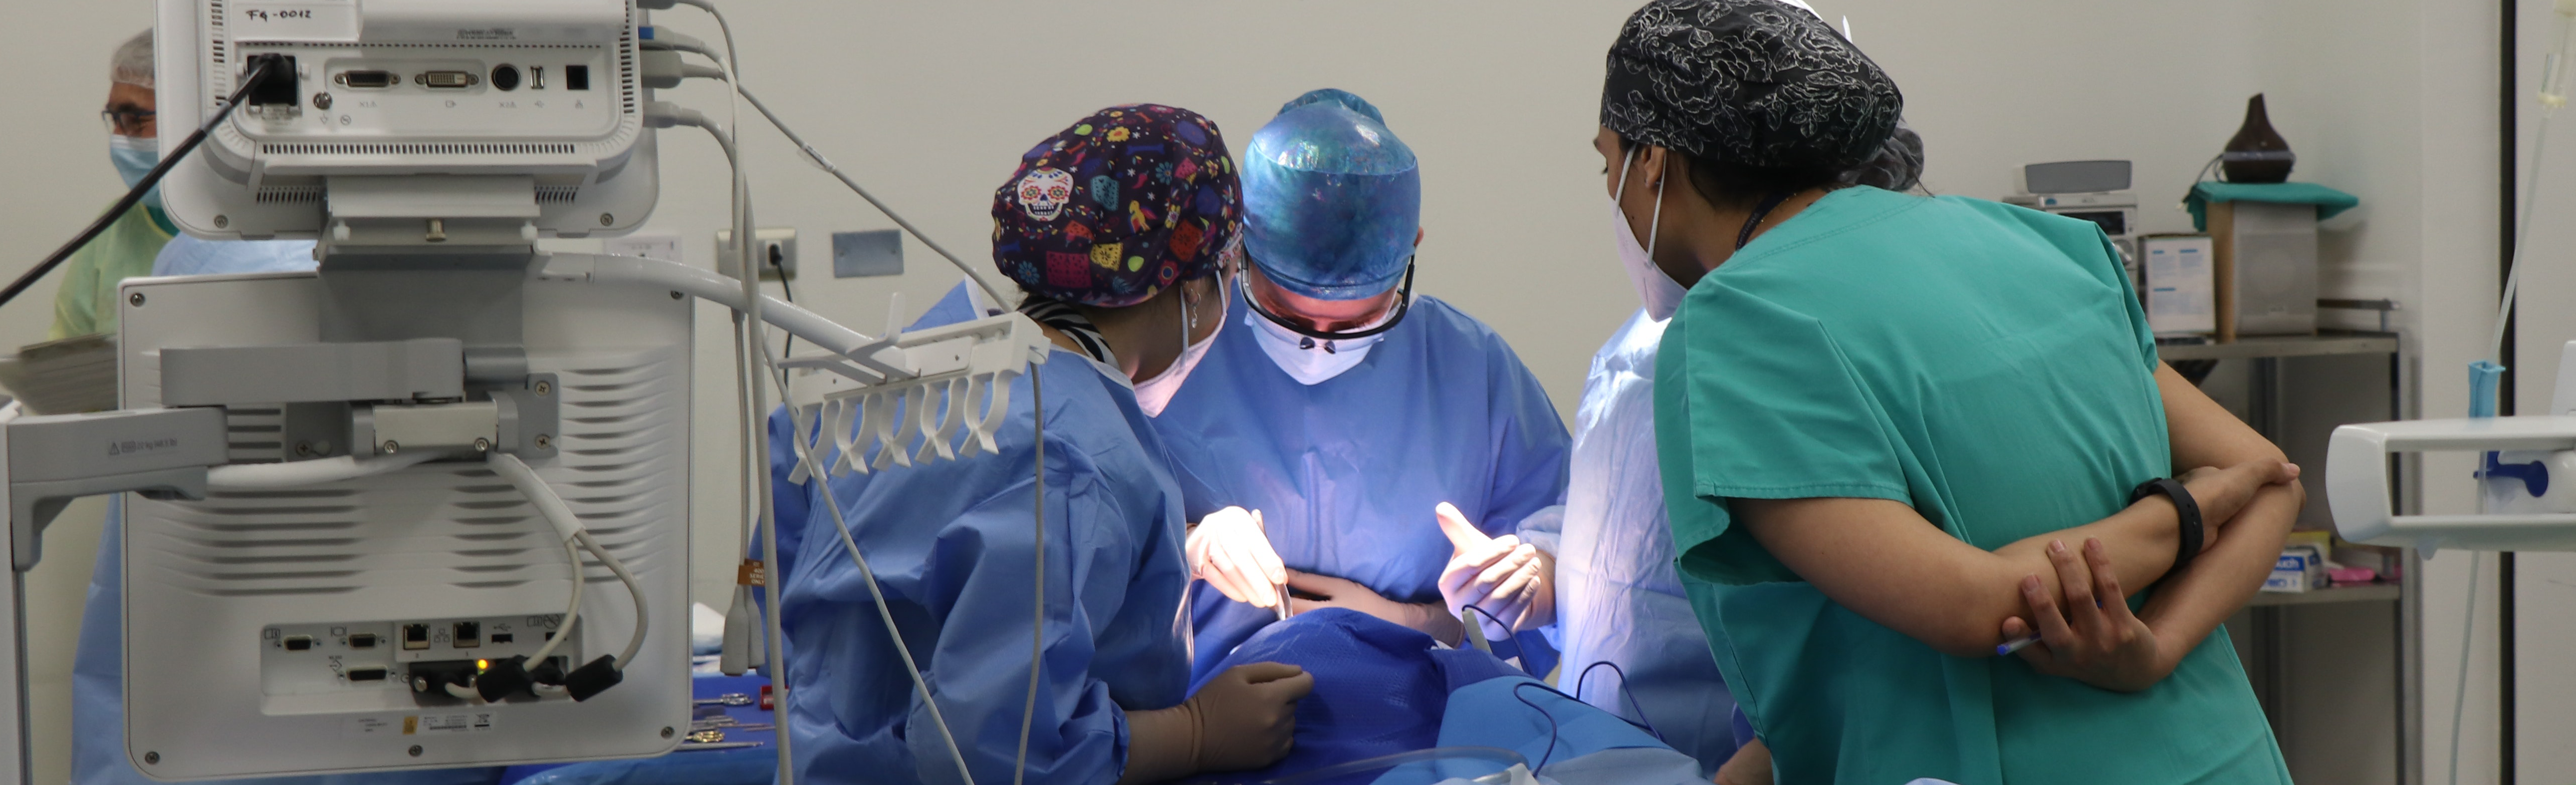 Surgical team in operating room | CU Department of Surgery